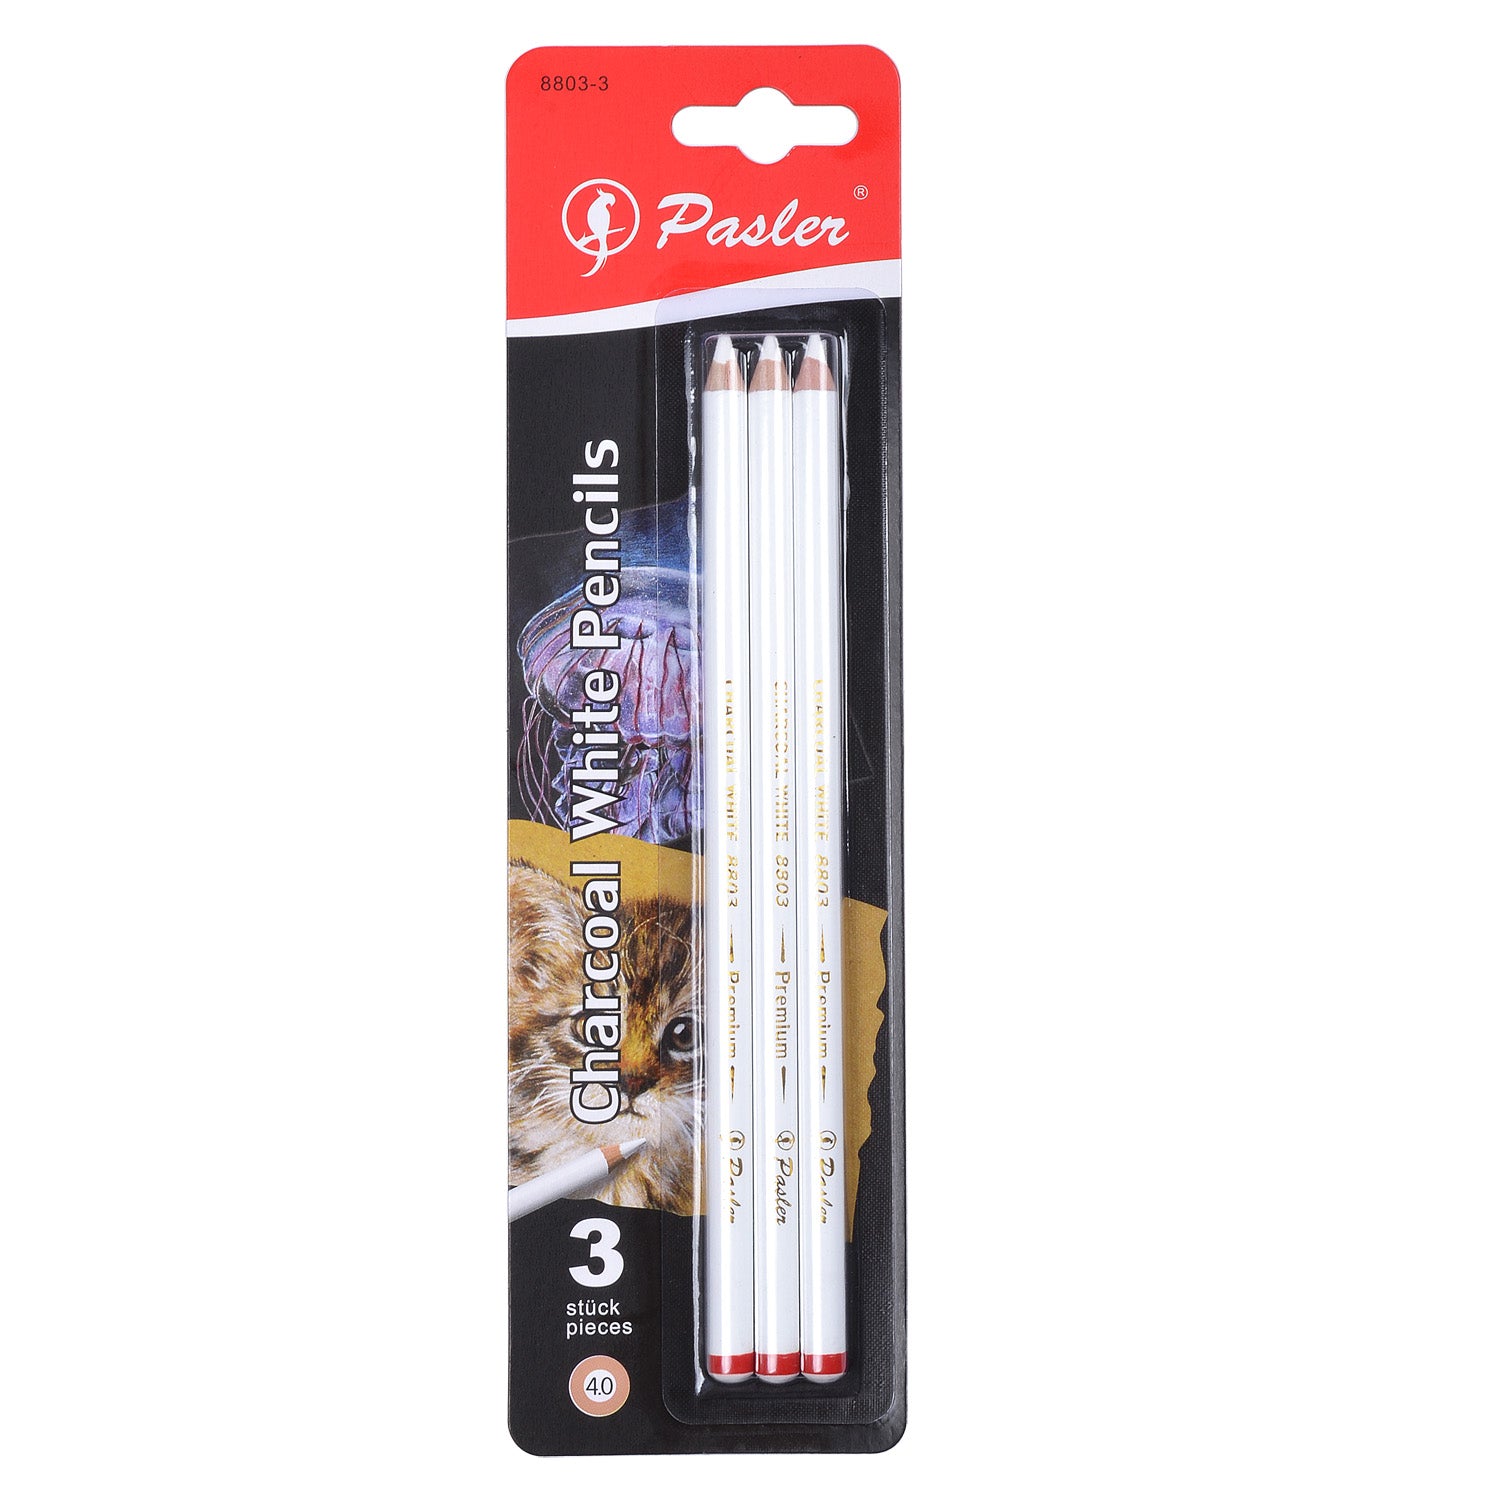 Wholesale Professional White Sketch Charcoal Pencils Standard